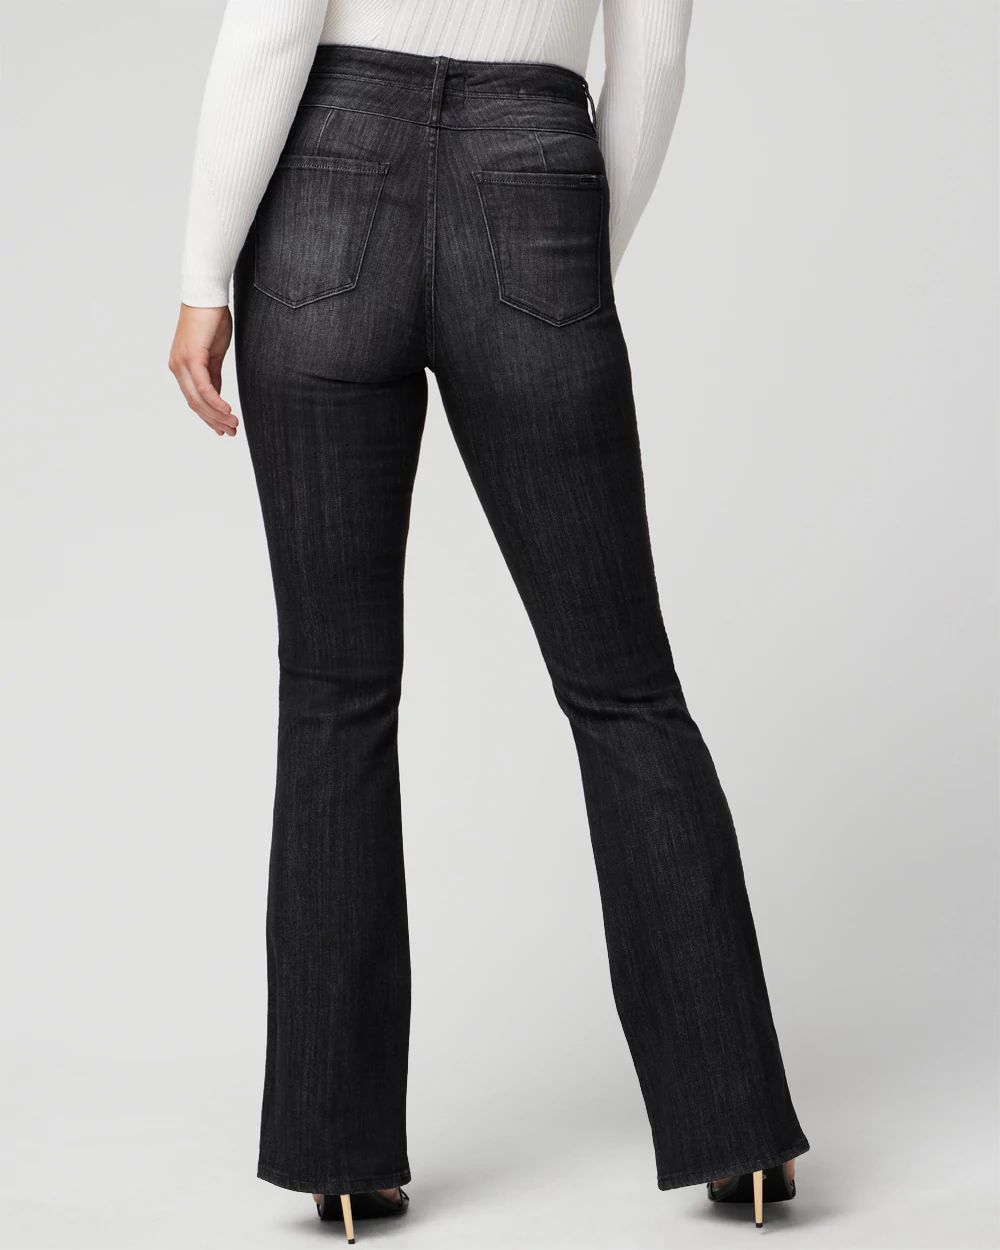 Curvy Extra-High Rise Pintuck Skinny Flare Jeans click to view larger image.